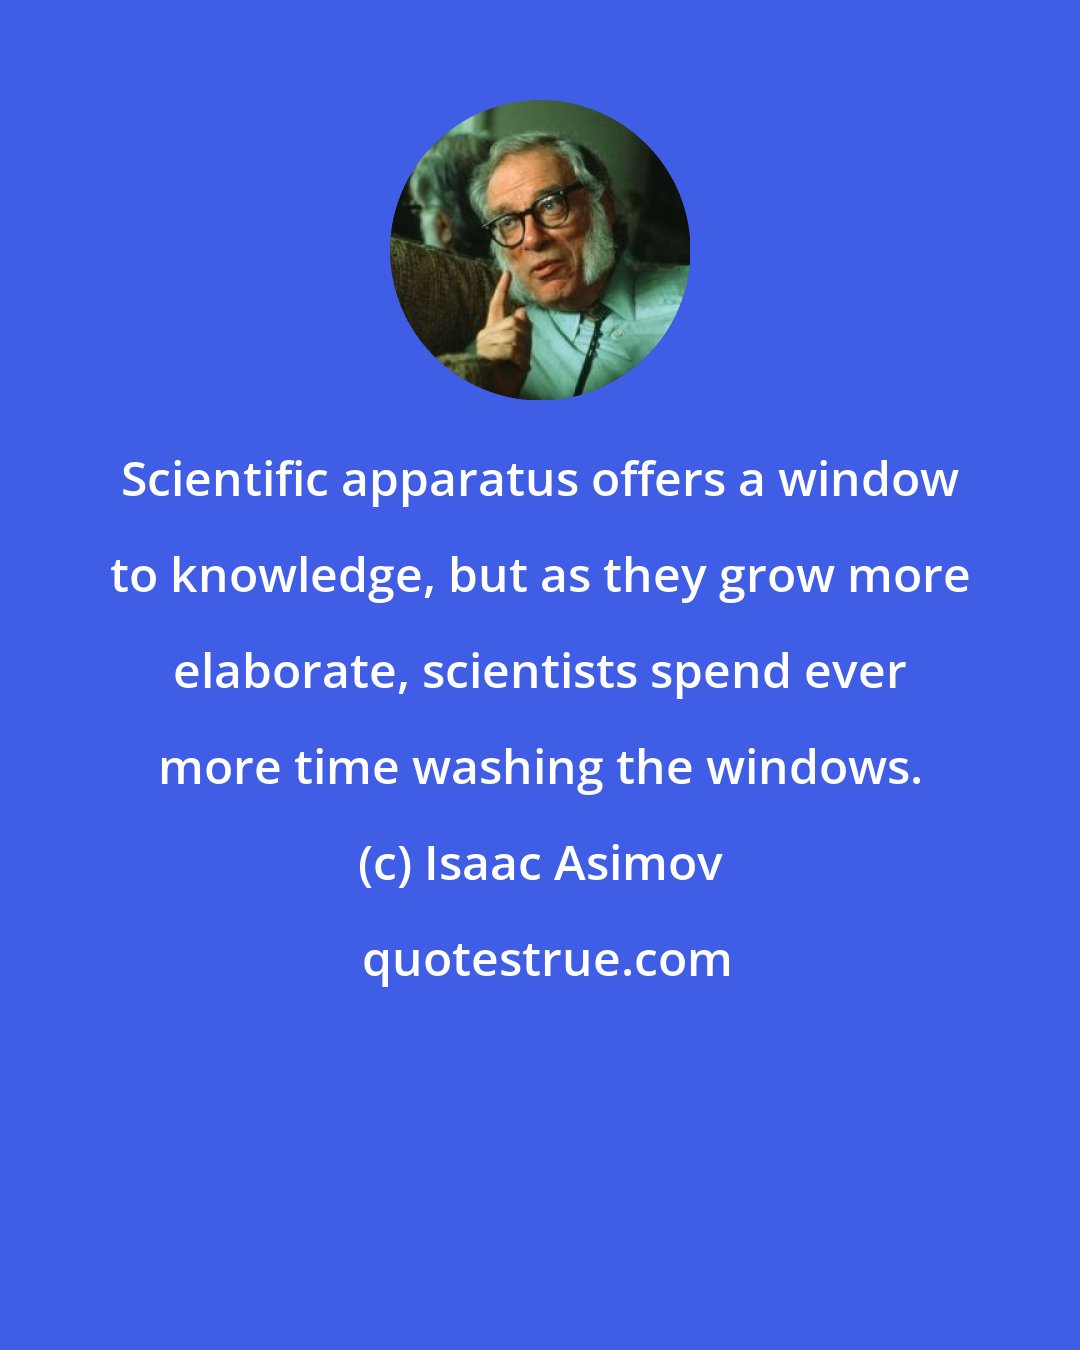 Isaac Asimov: Scientific apparatus offers a window to knowledge, but as they grow more elaborate, scientists spend ever more time washing the windows.